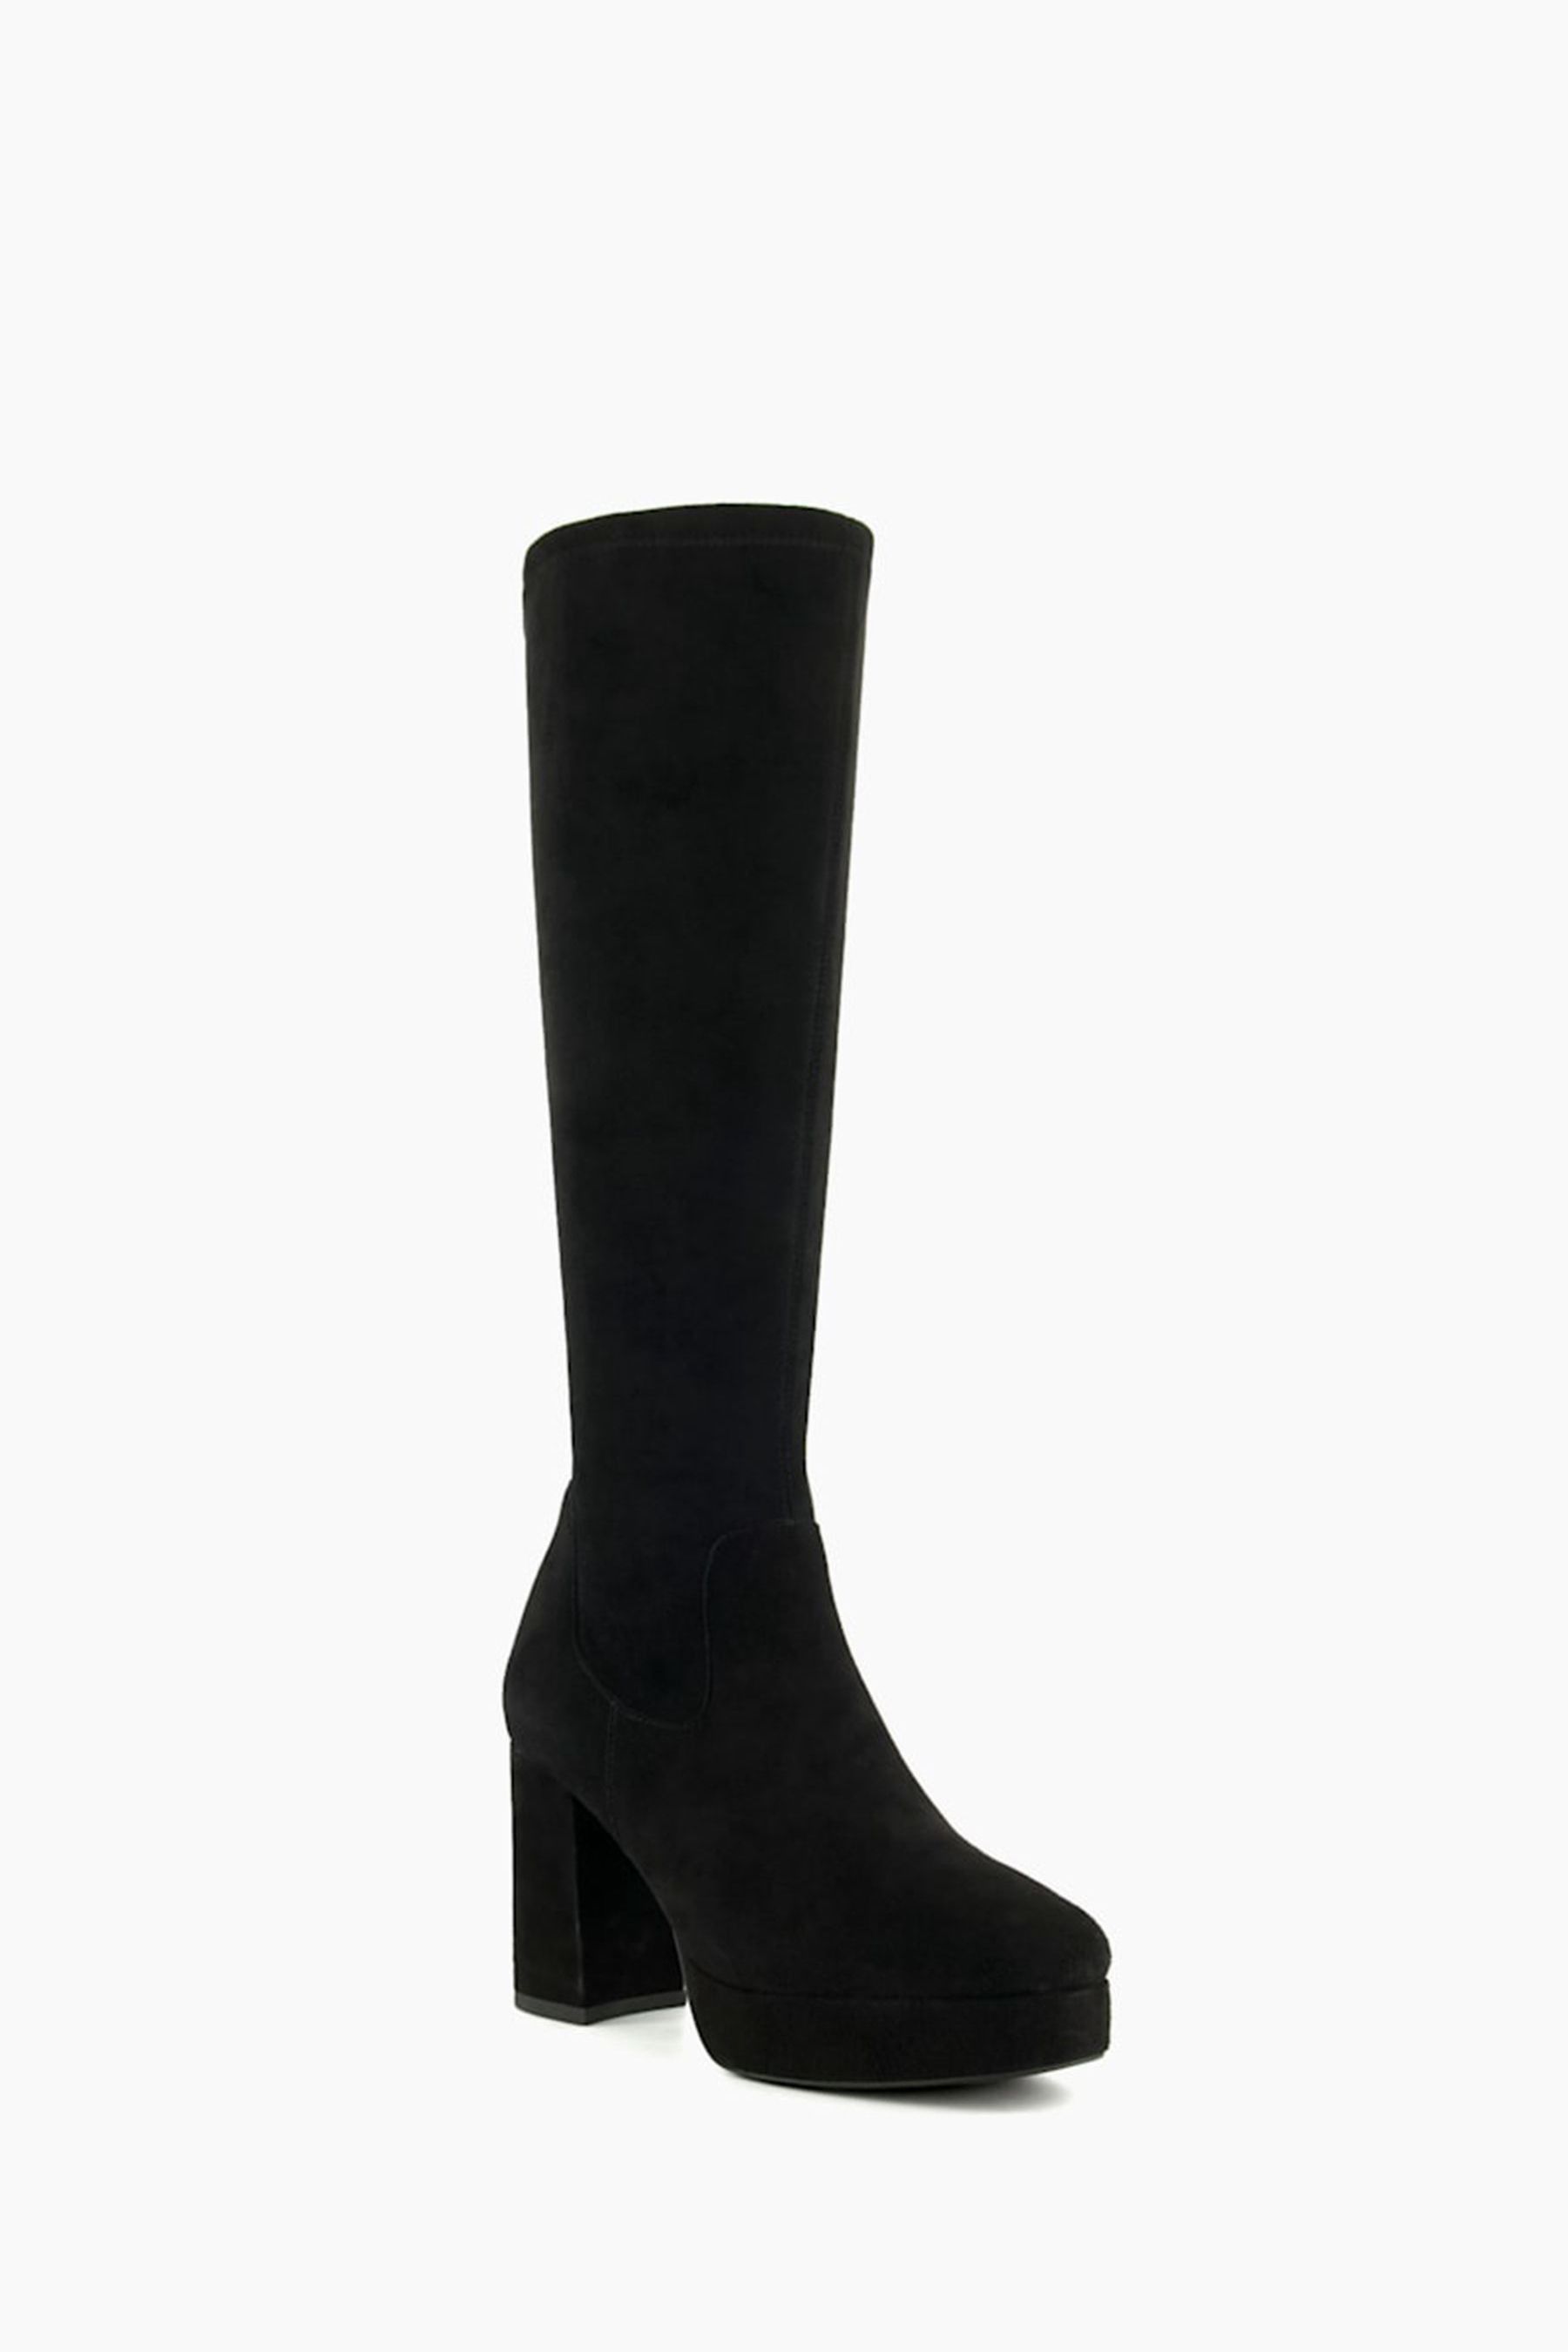 Buy Dune London Sassy Stretch Platform Knee-High Black Boots from the ...